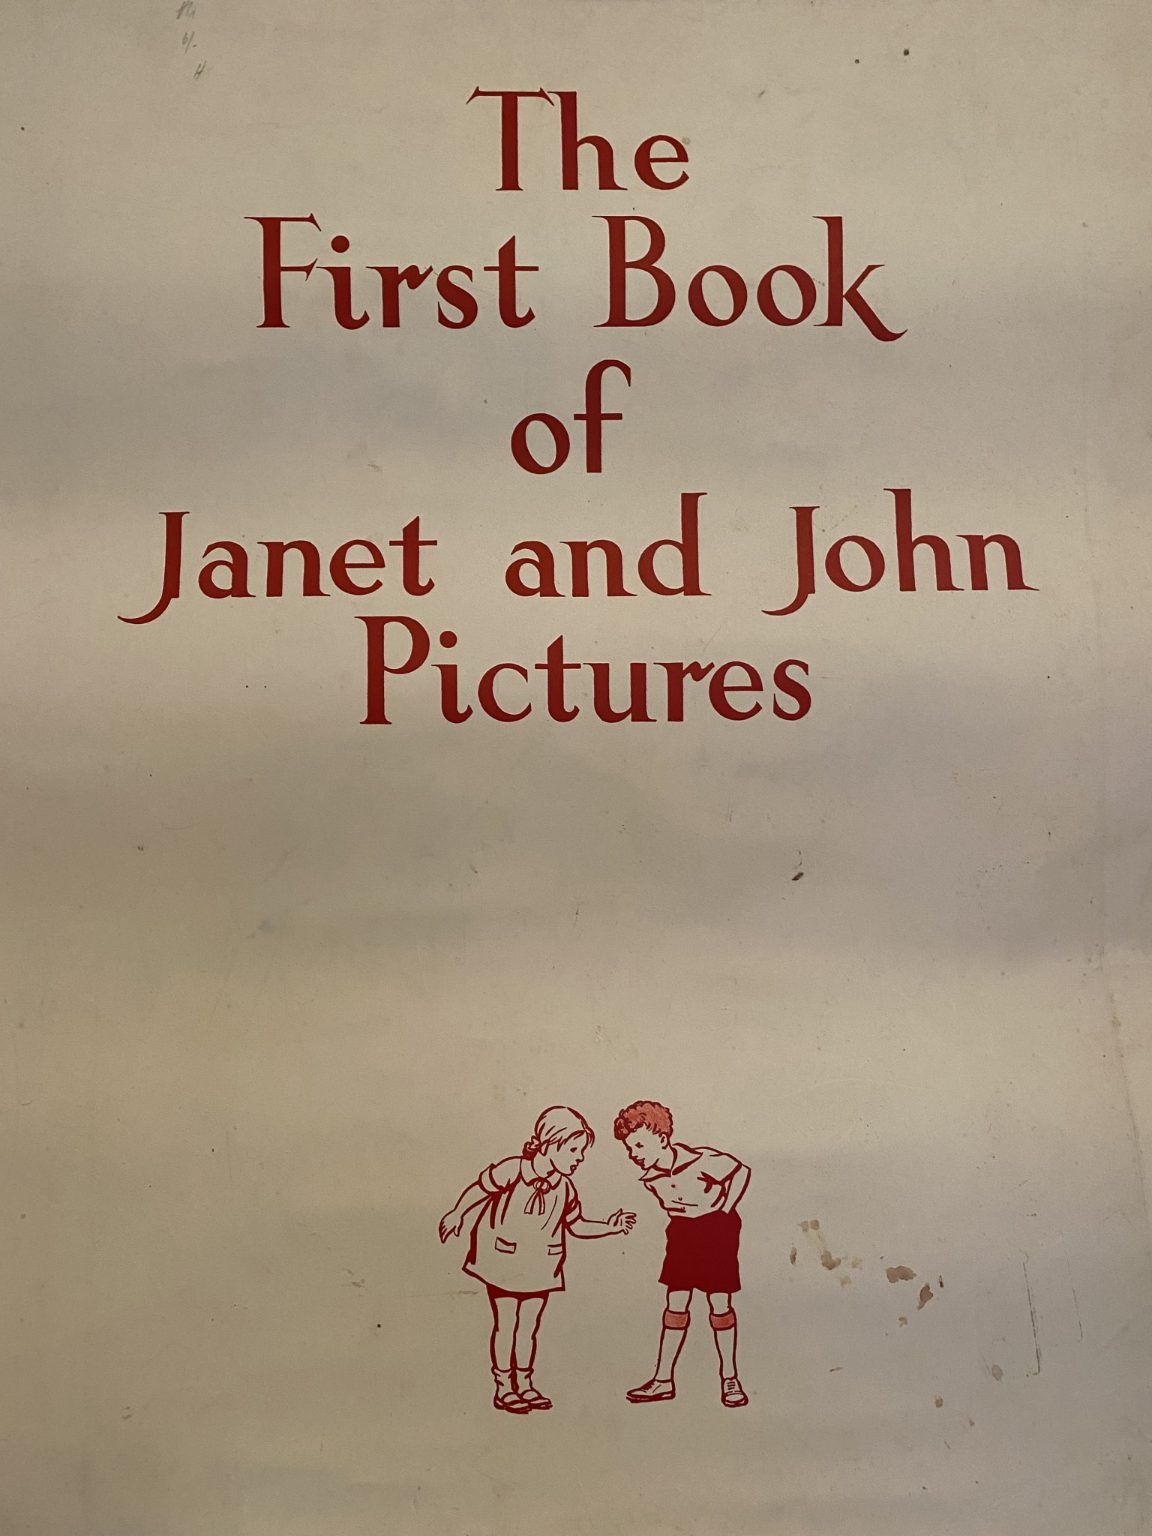 VINTAGE POSTERS: The First Book of Janet and John Pictures 1950s